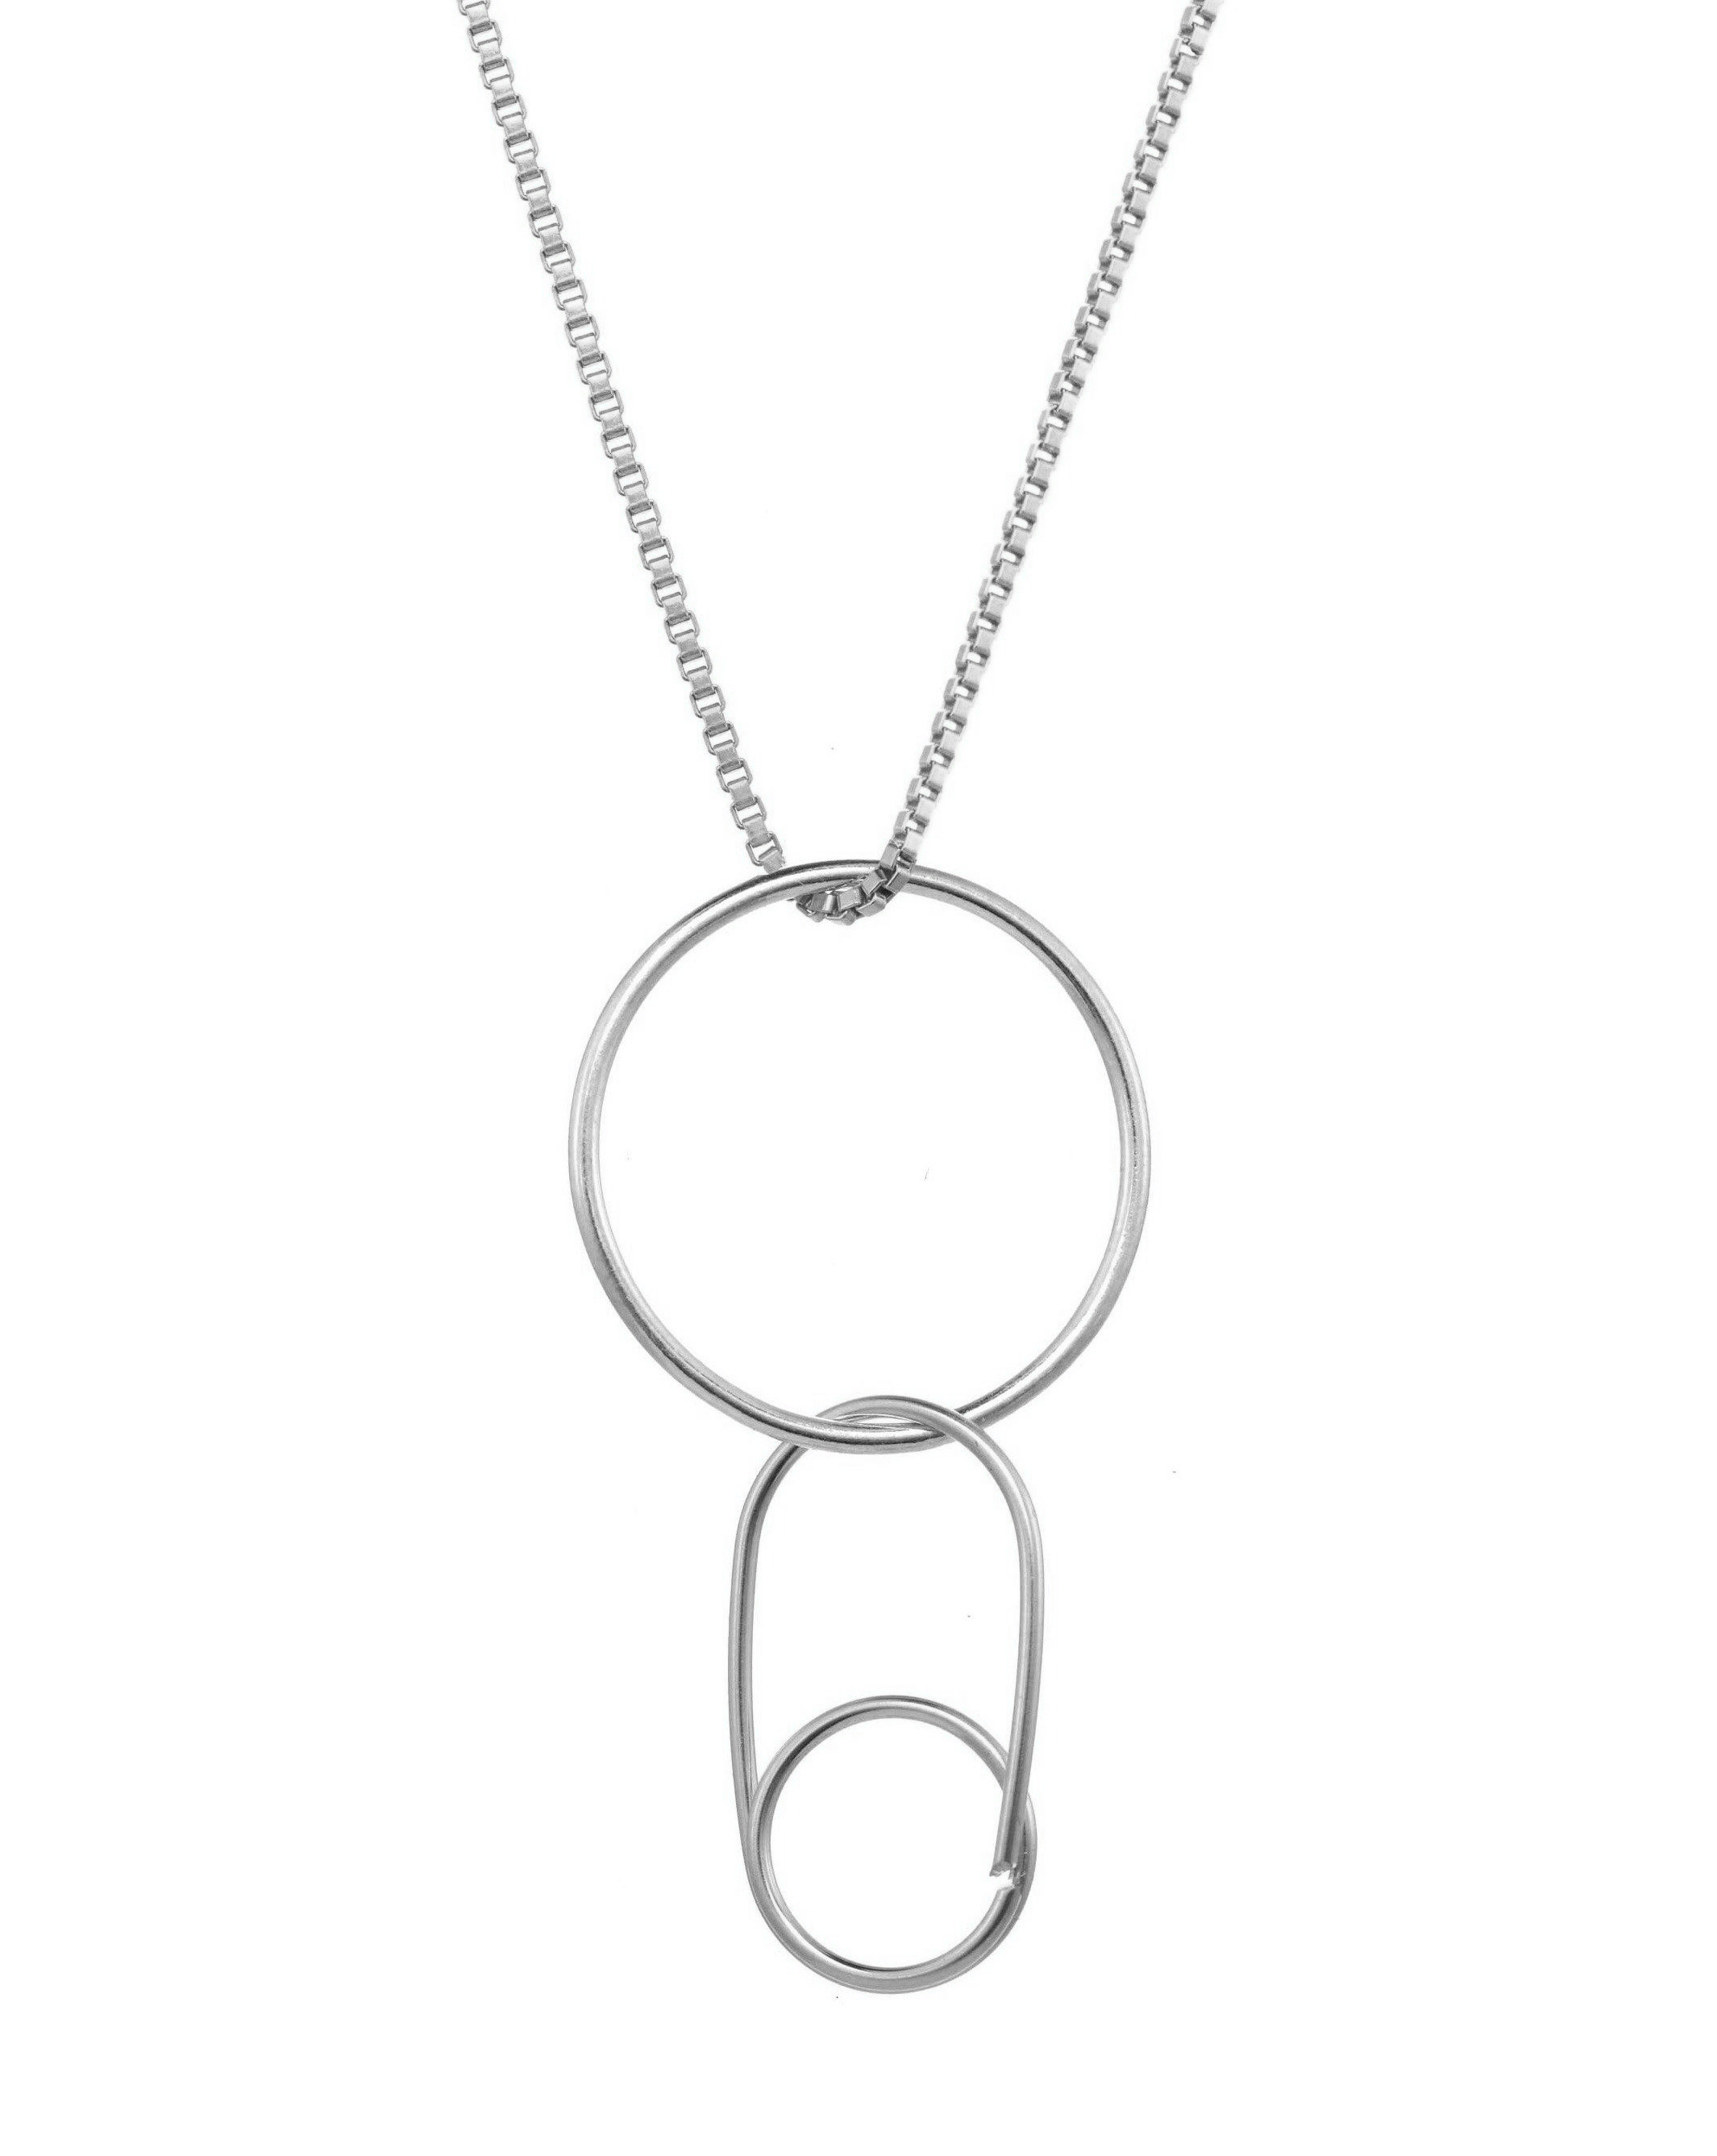 Rina Necklace by KOZAKH. A 16 to 18 inch adjustable length, 1mm box chain necklace, crafted in Sterling Silver, featuring a Sterling Silver ring and a hand formed safety pin.